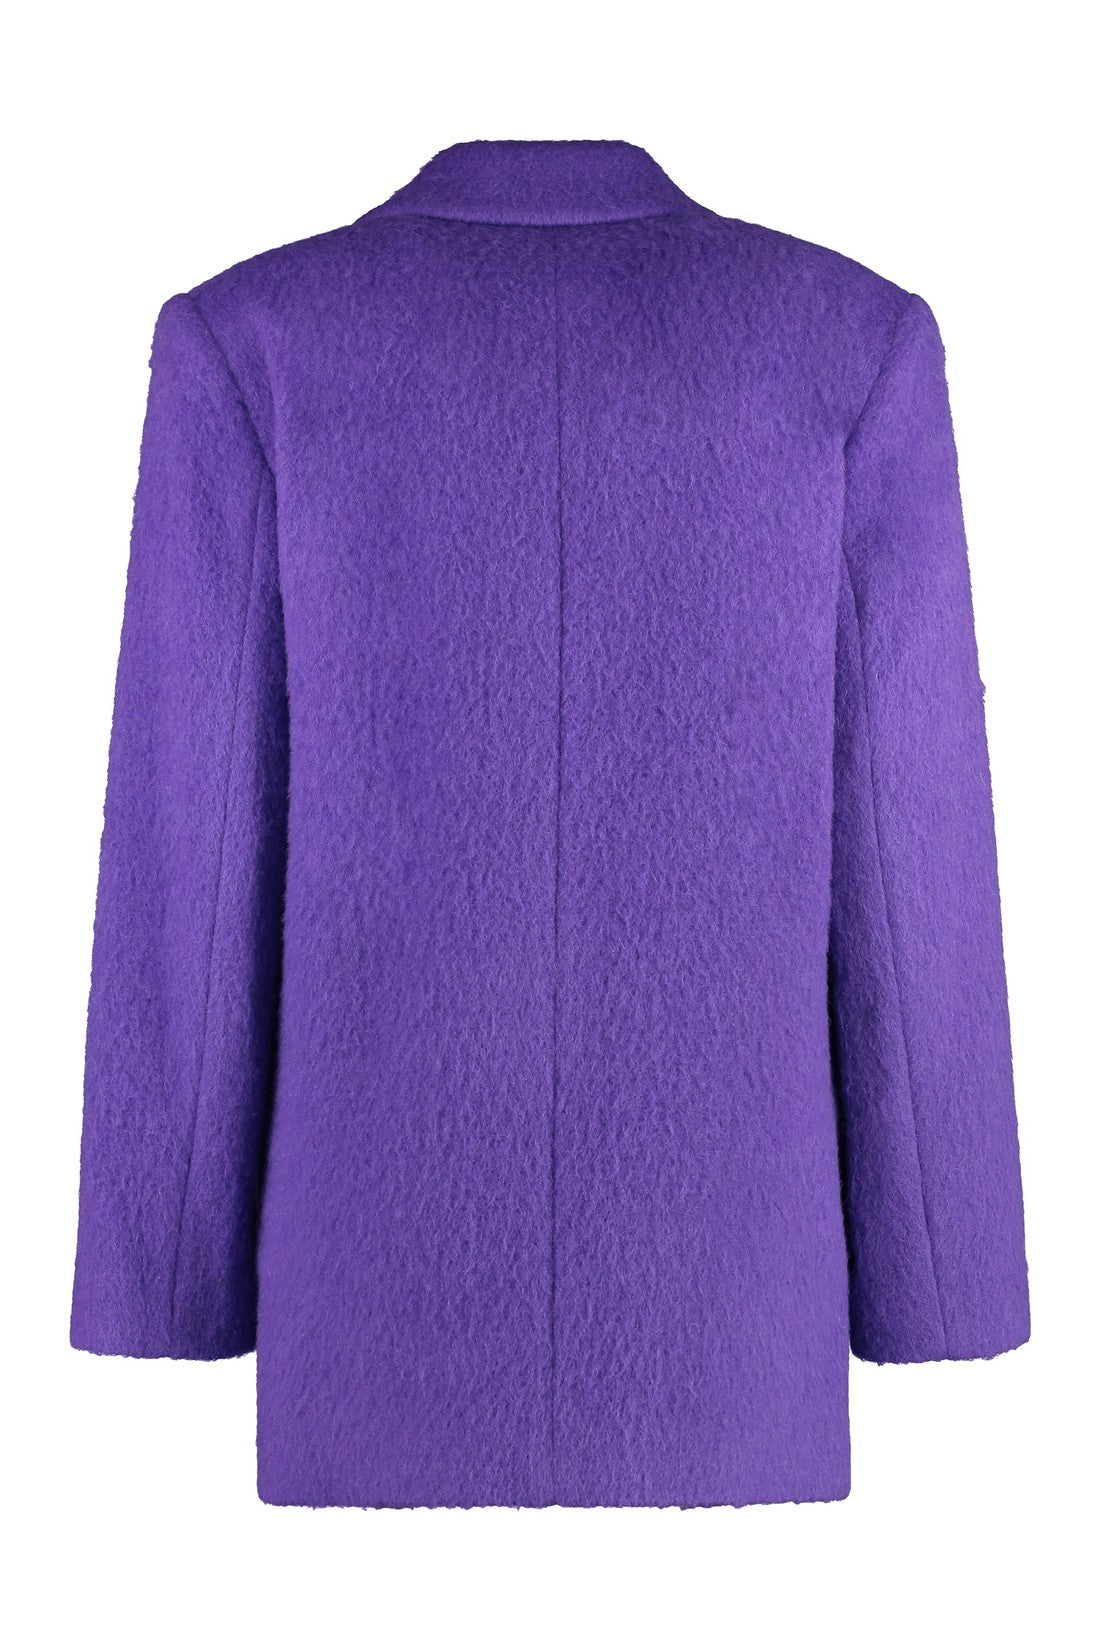 MSGM-OUTLET-SALE-Wool blend double-breasted coat-ARCHIVIST